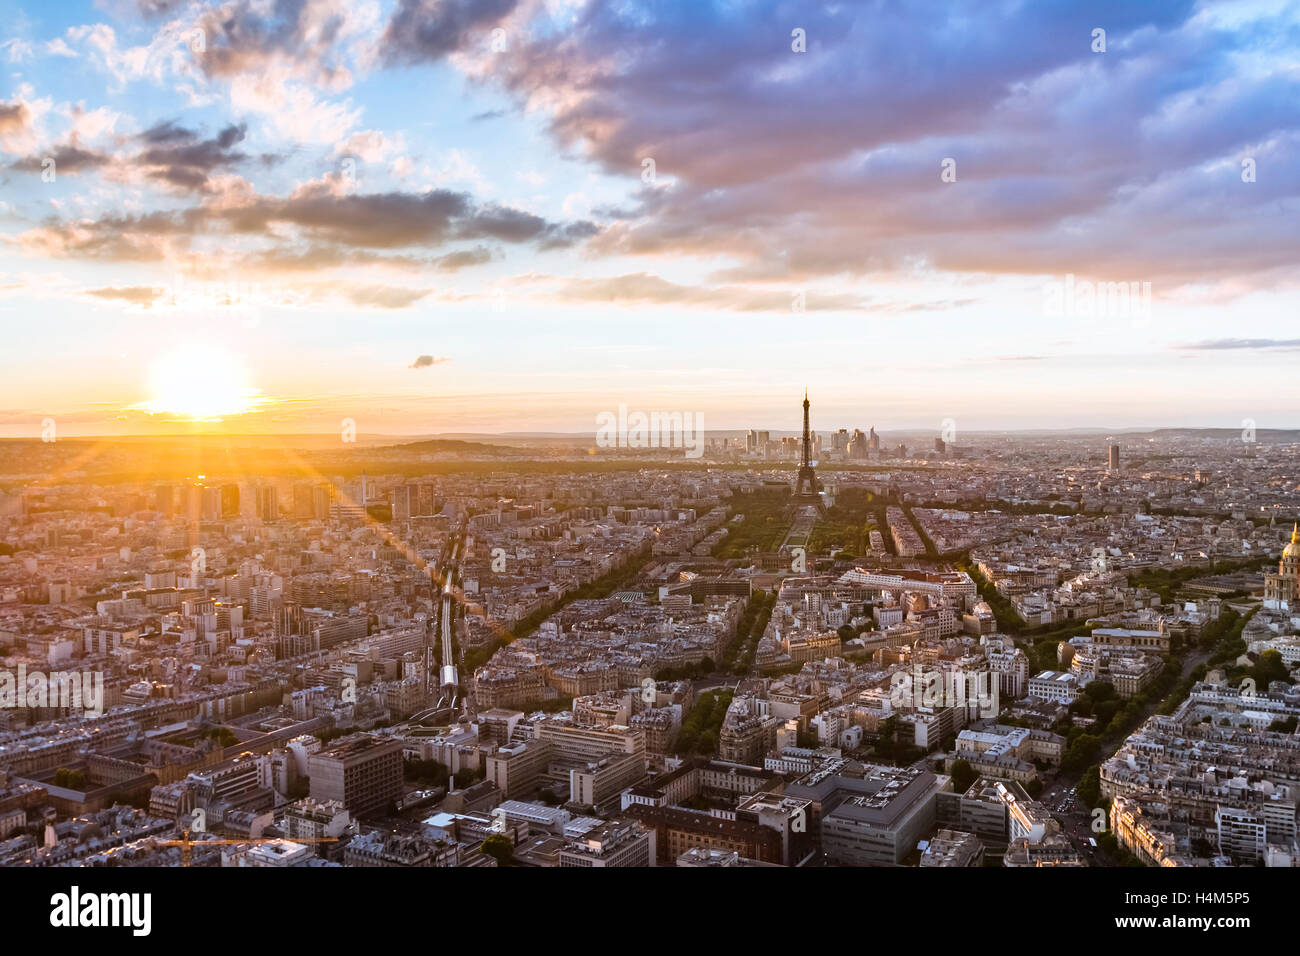 Beautiful aerial view of Eiffel Tower and Paris roofs at sunset HDR Stock Photo